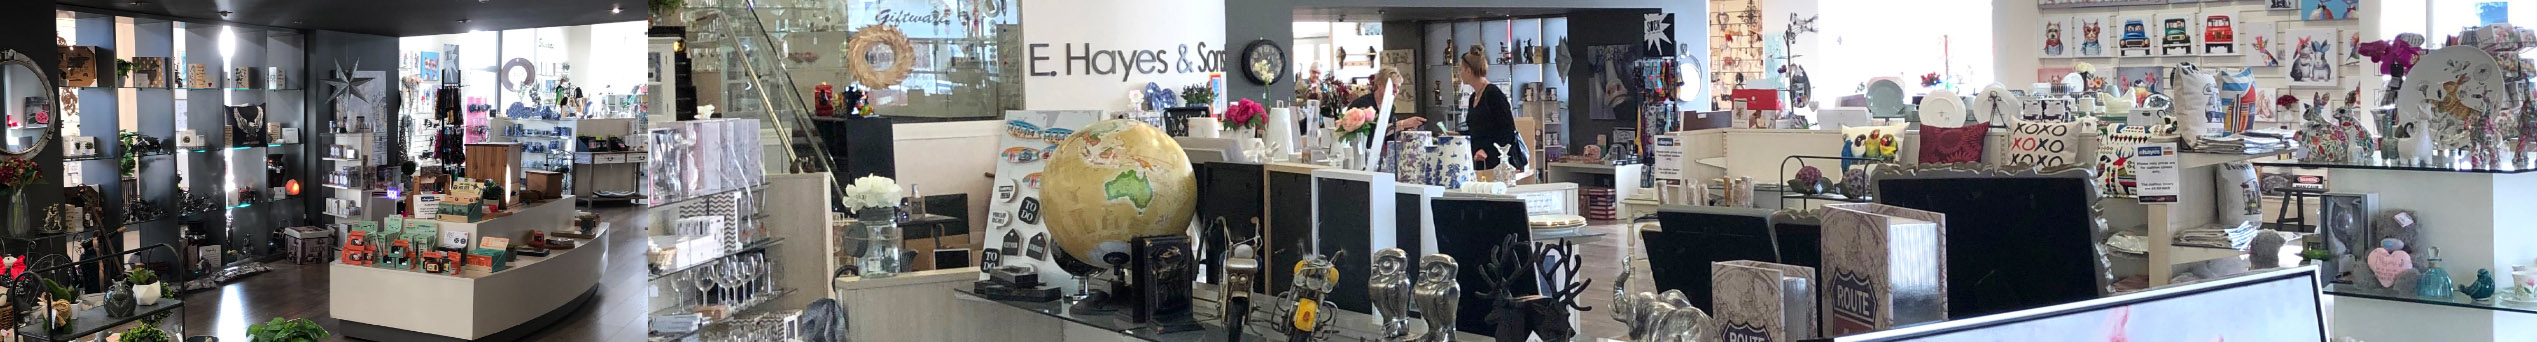 E Hayes Giftware and Homeware